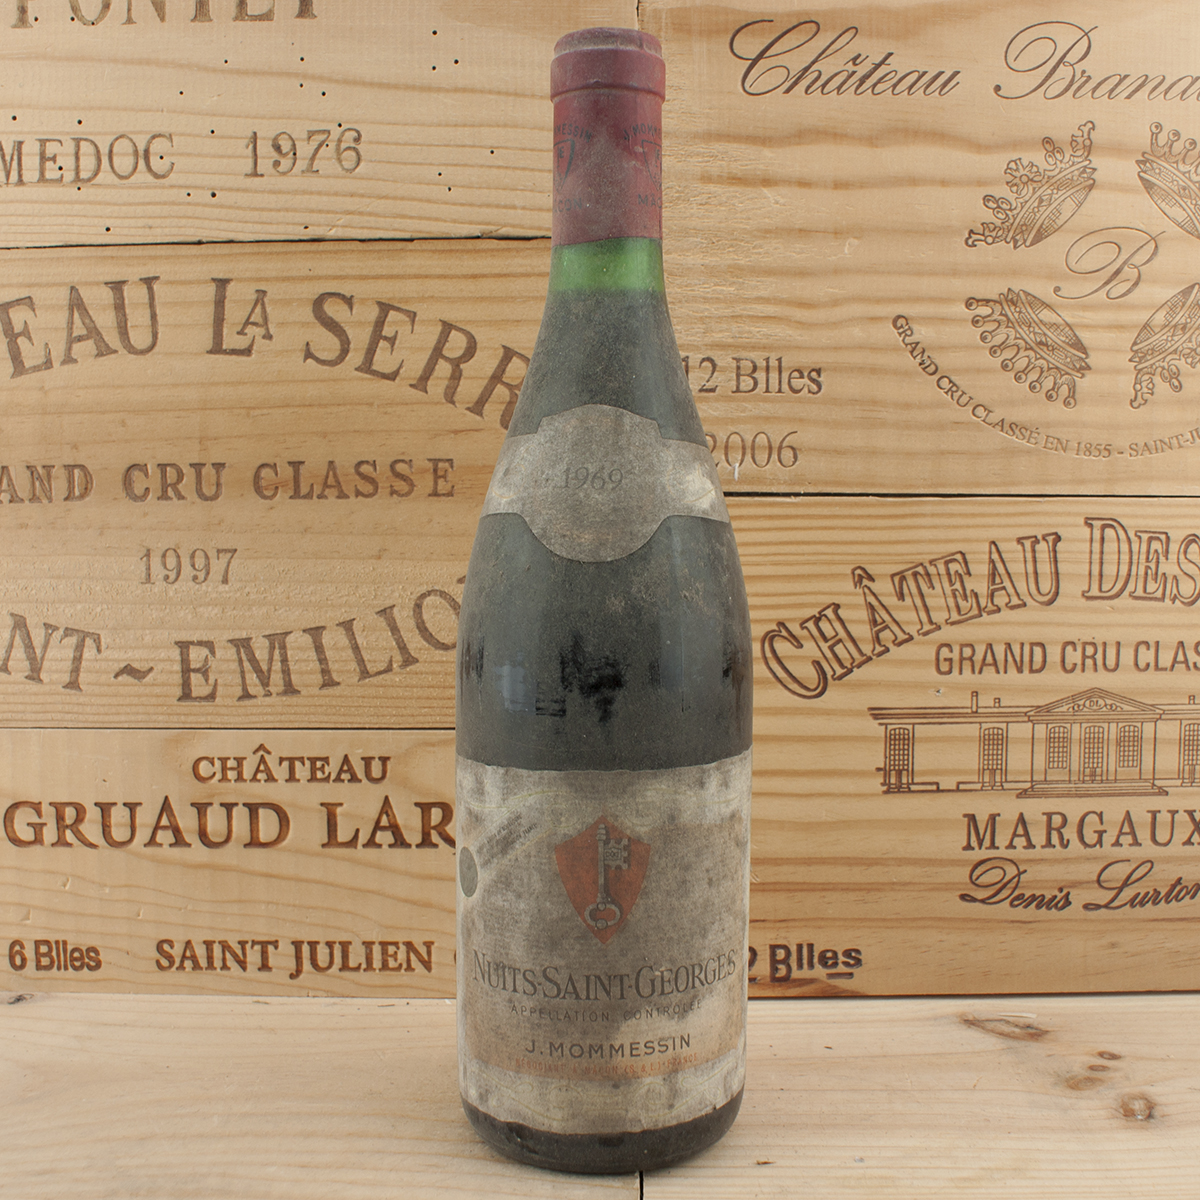 1969 Nuits St. Georges Mommessin